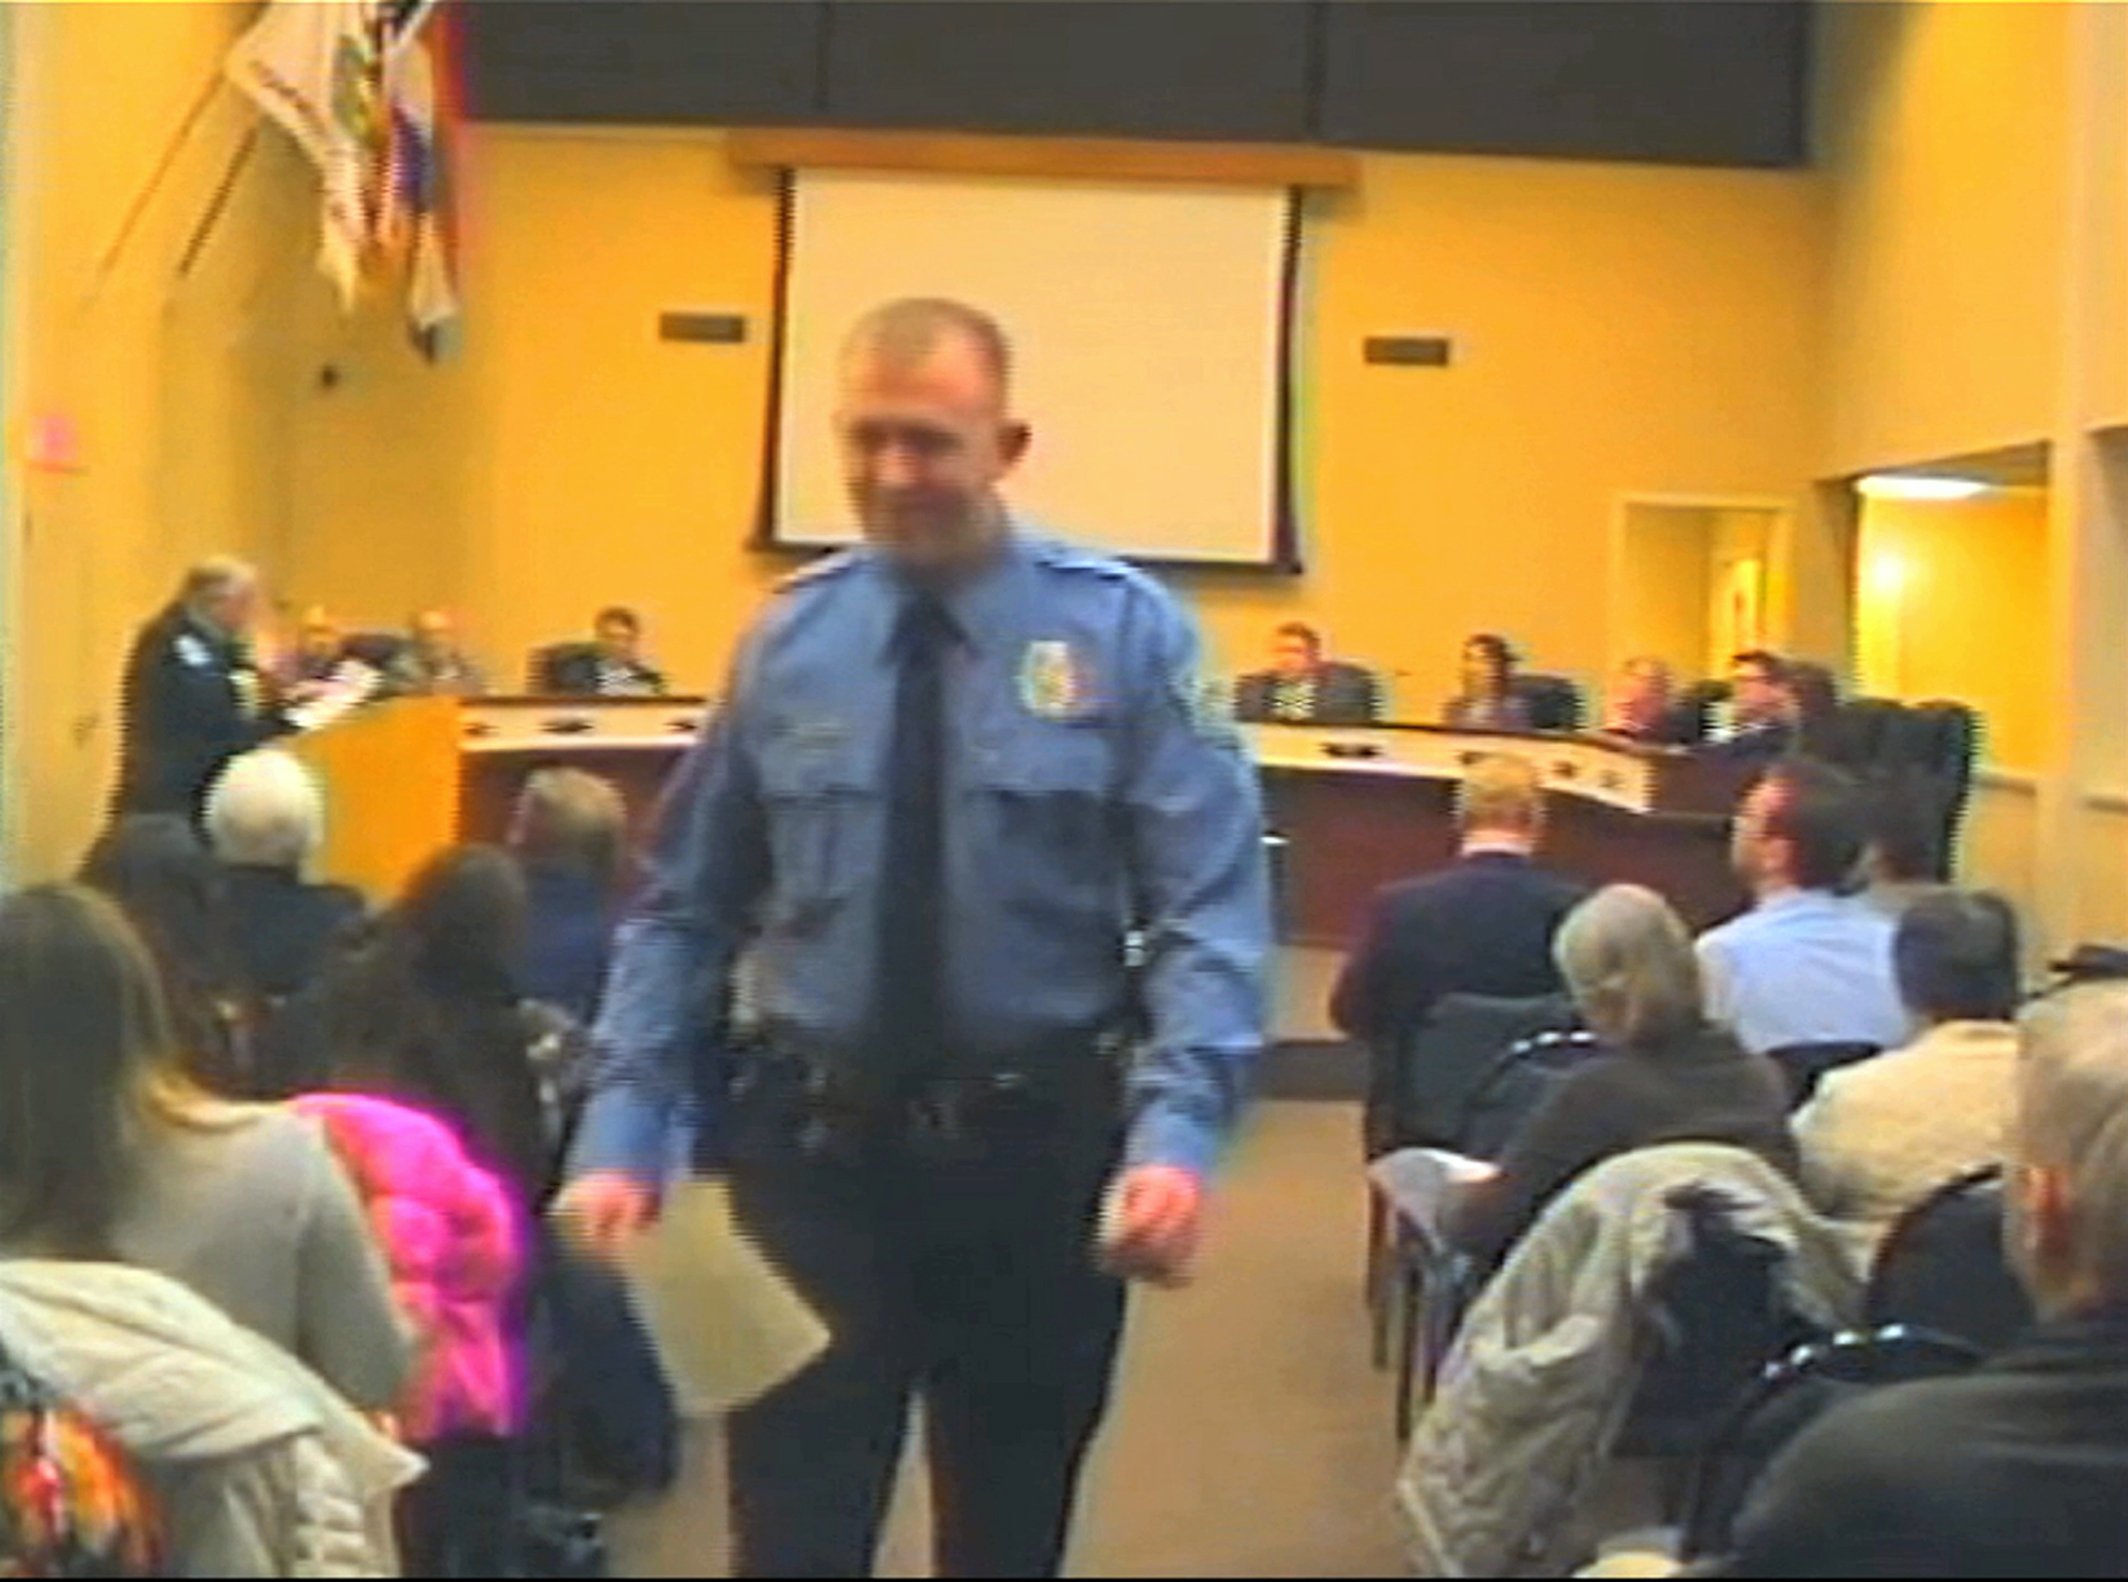 Officer Darren Wilson attends a city council meeting in Ferguson on Feb. 11, 2014 in this image released from video by the City of Ferguson, Mo. (AP)